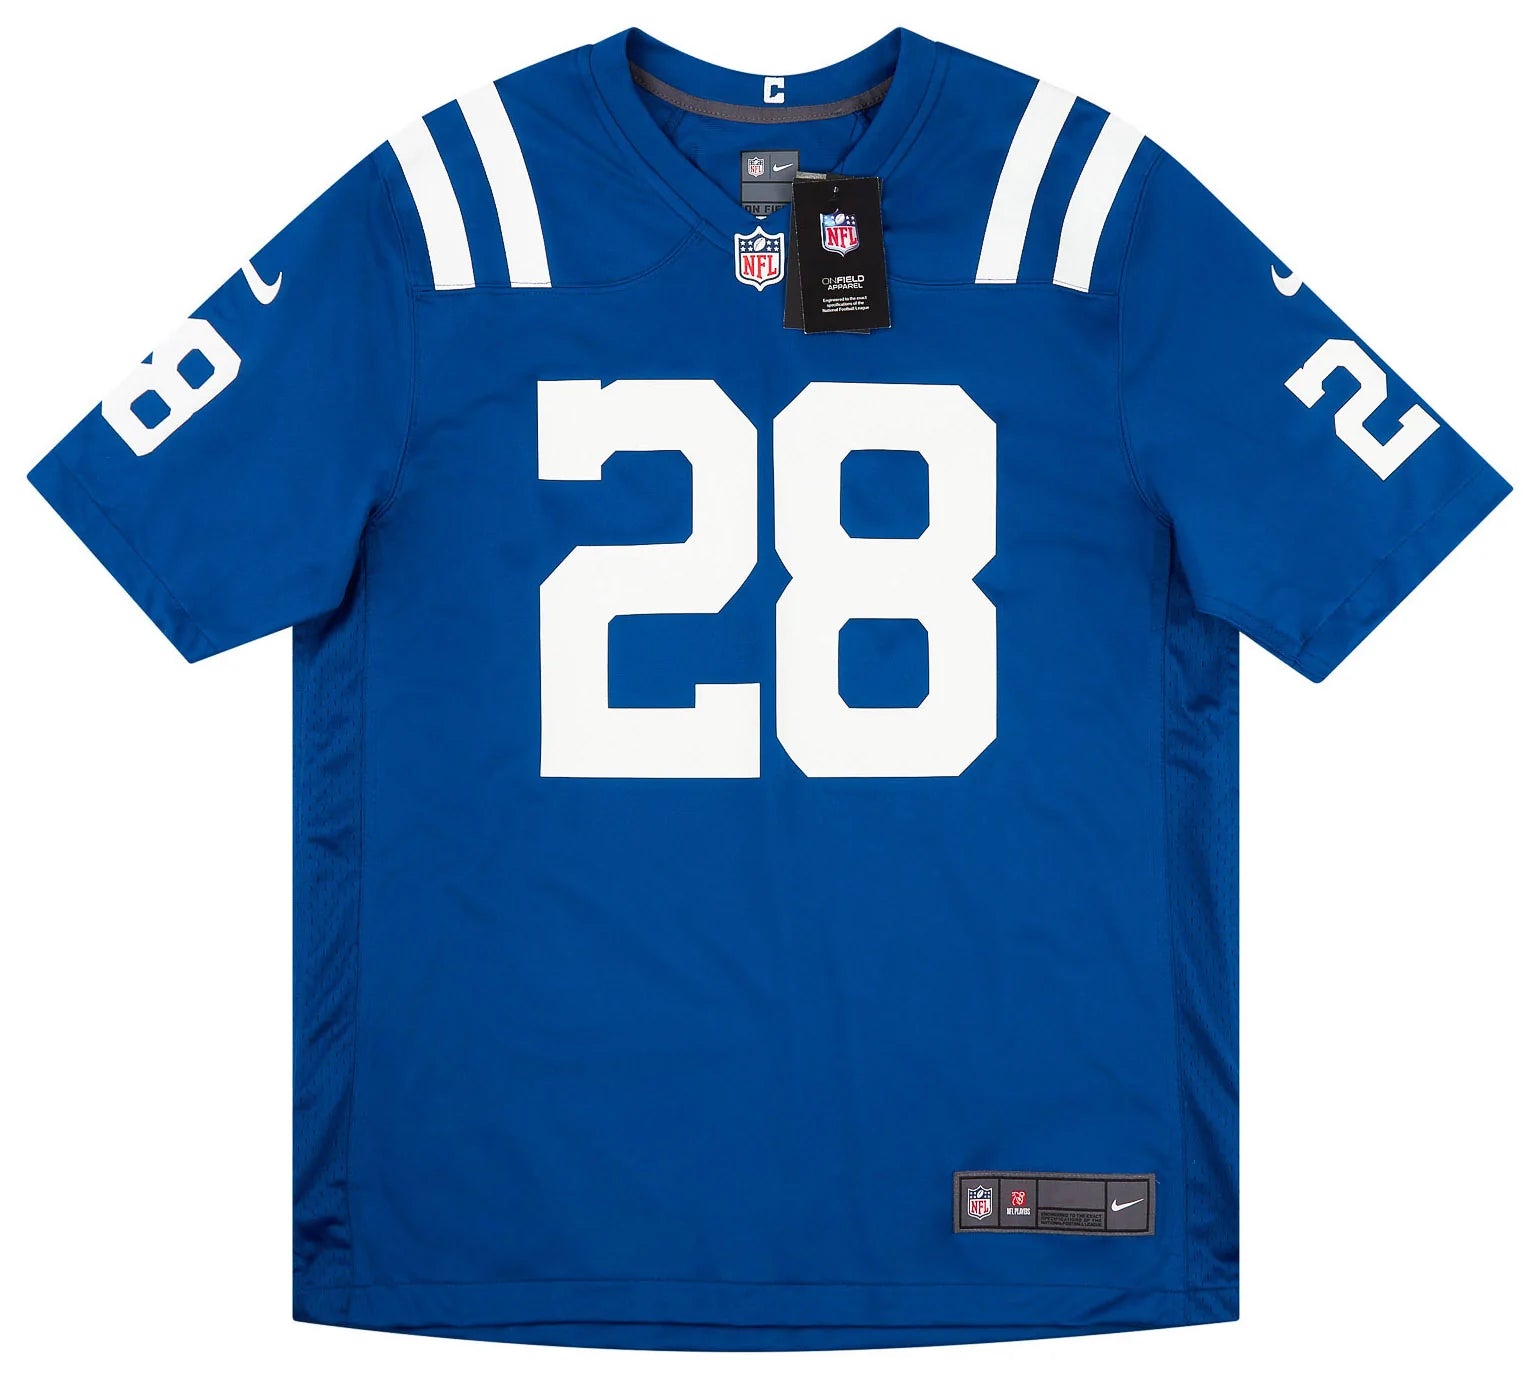 2020-22 INDIANAPOLIS COLTS TAYLOR #28 NIKE GAME JERSEY (HOME) S - W/TAGS